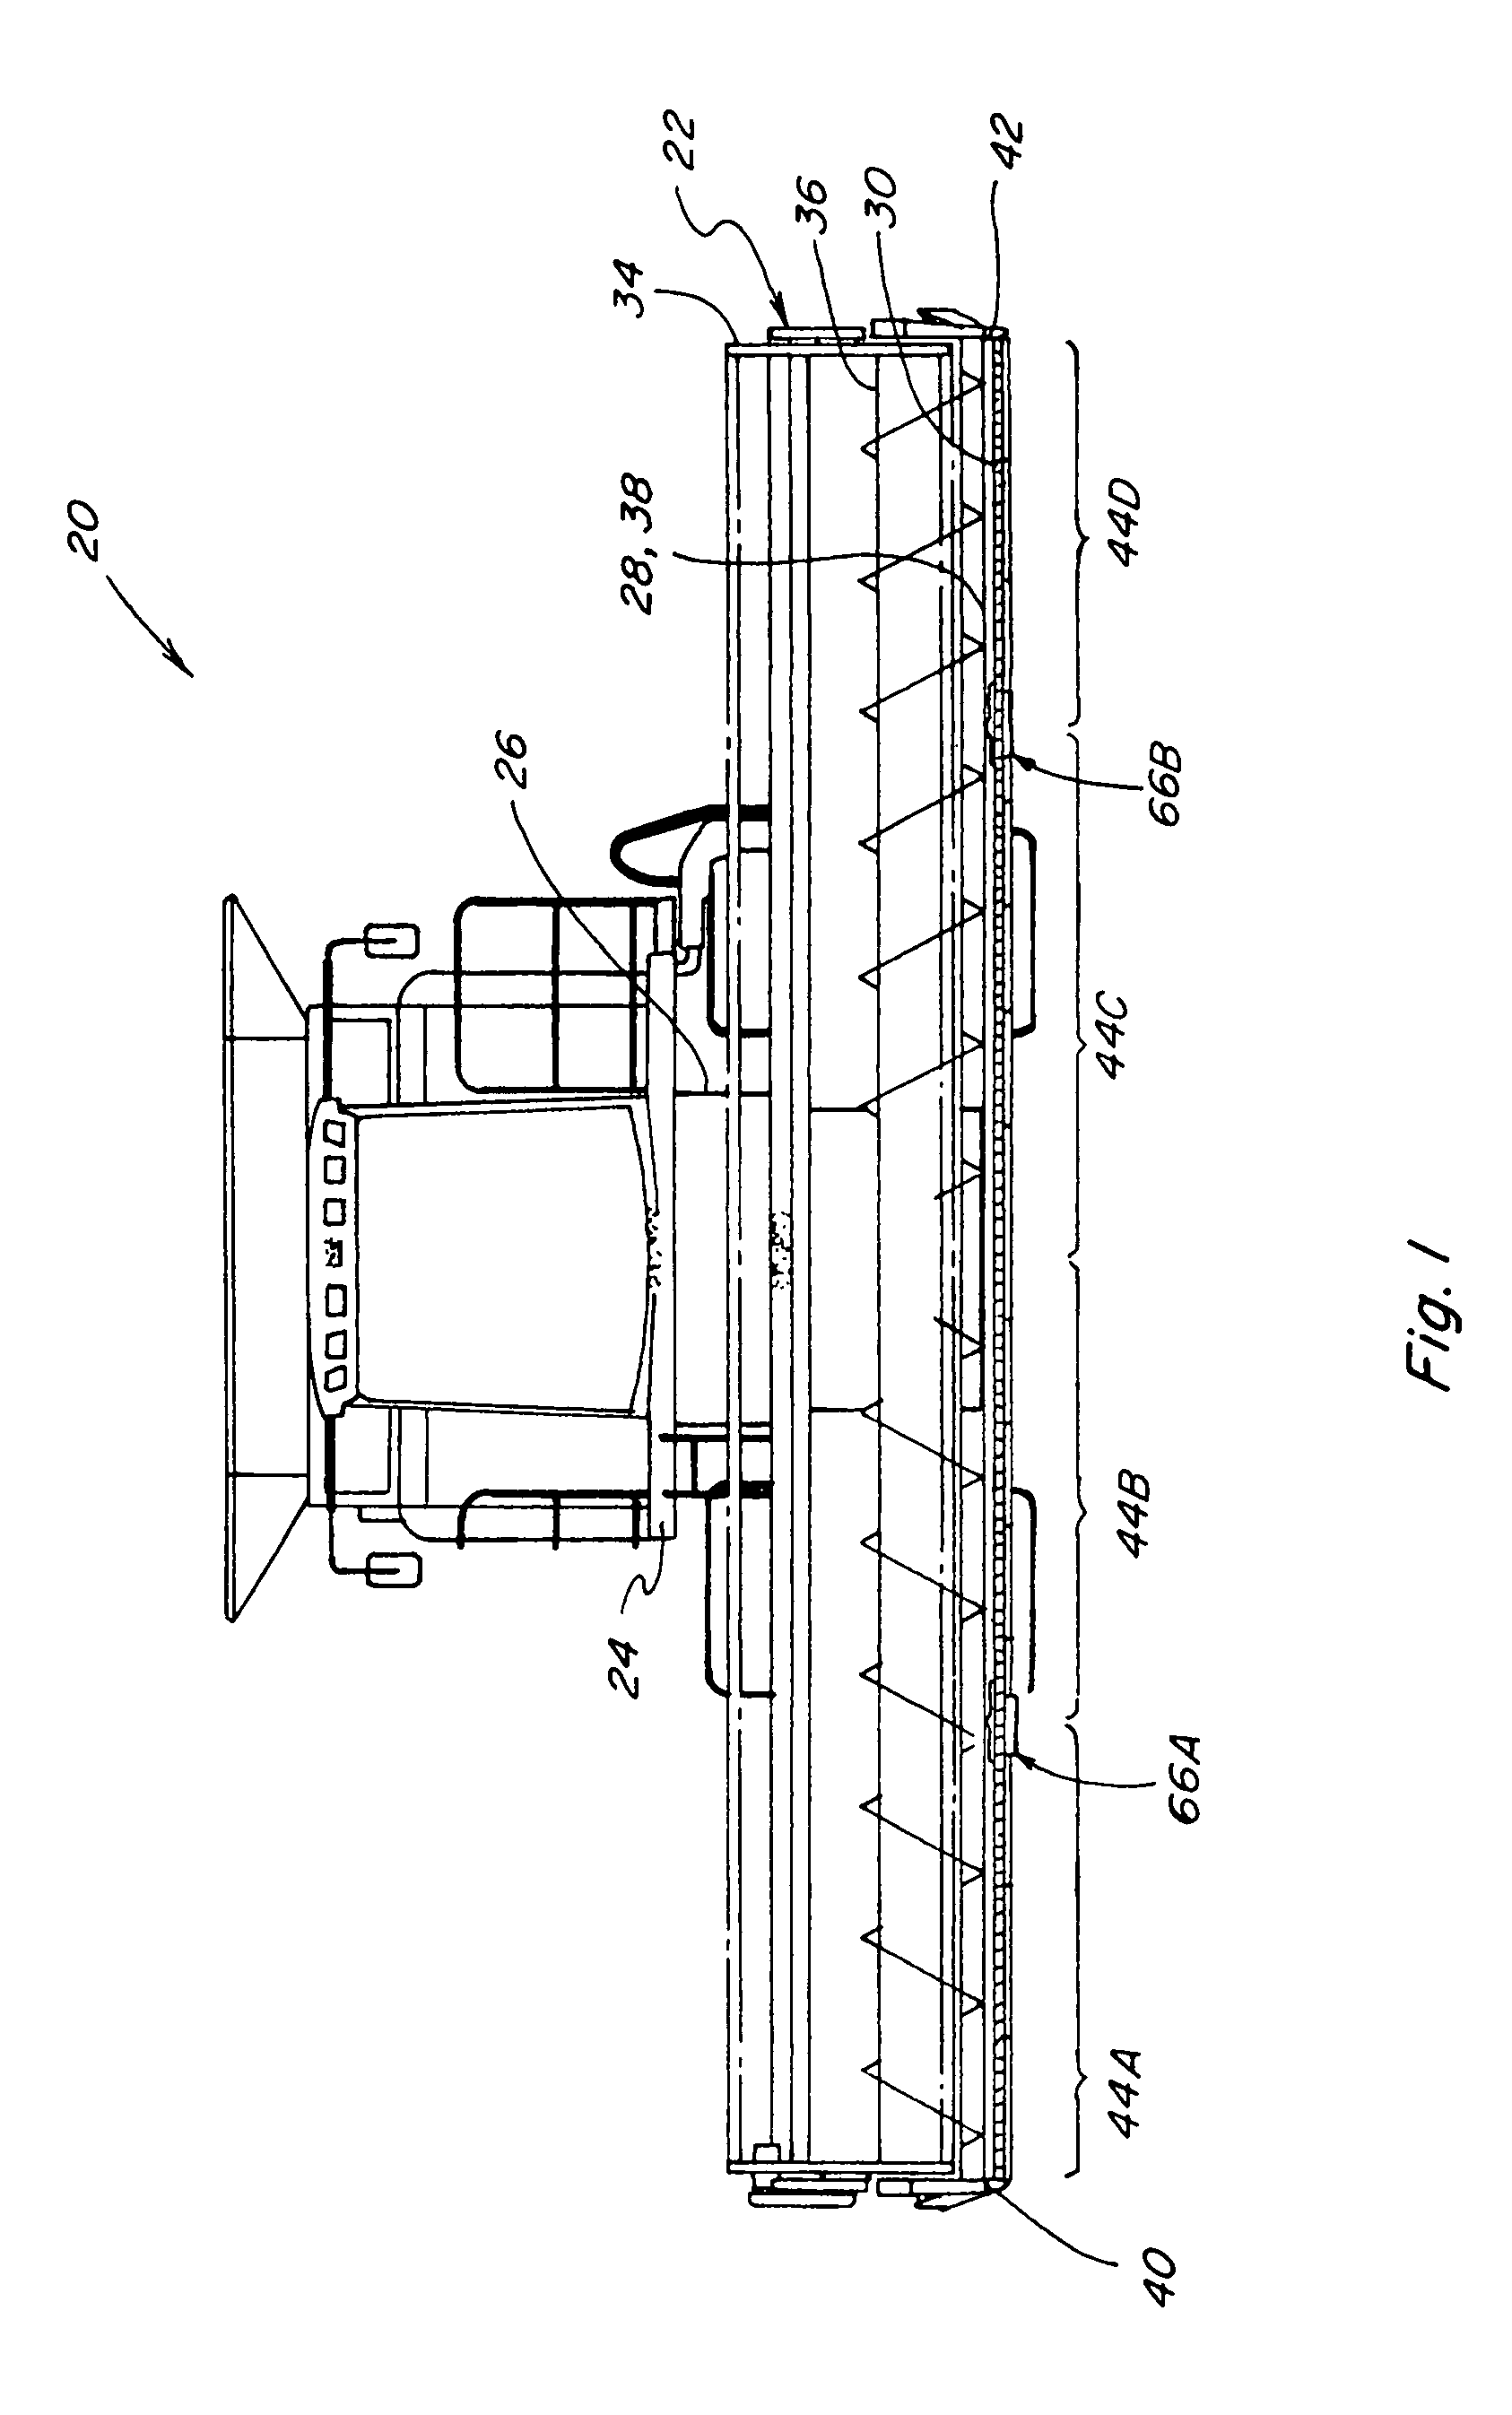 Header with high speed sickle drives for a plant cutting machine